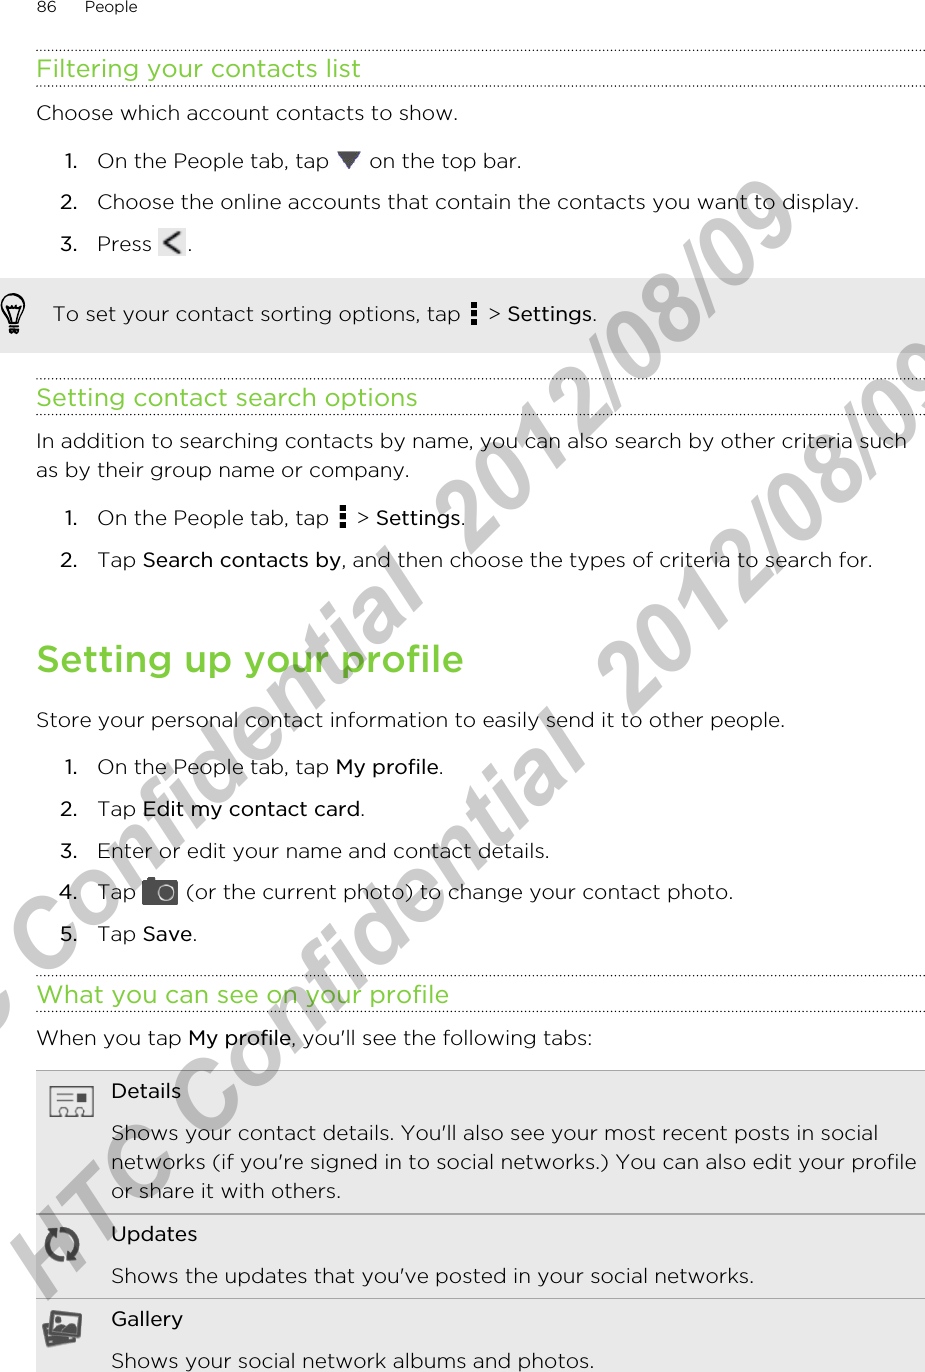 Filtering your contacts listChoose which account contacts to show.1. On the People tab, tap   on the top bar.2. Choose the online accounts that contain the contacts you want to display.3. Press  .To set your contact sorting options, tap   &gt; Settings.Setting contact search optionsIn addition to searching contacts by name, you can also search by other criteria suchas by their group name or company.1. On the People tab, tap   &gt; Settings.2. Tap Search contacts by, and then choose the types of criteria to search for.Setting up your profileStore your personal contact information to easily send it to other people.1. On the People tab, tap My profile.2. Tap Edit my contact card.3. Enter or edit your name and contact details.4. Tap   (or the current photo) to change your contact photo.5. Tap Save.What you can see on your profileWhen you tap My profile, you&apos;ll see the following tabs:DetailsShows your contact details. You&apos;ll also see your most recent posts in socialnetworks (if you&apos;re signed in to social networks.) You can also edit your profileor share it with others.UpdatesShows the updates that you&apos;ve posted in your social networks.GalleryShows your social network albums and photos.86 PeopleHTC Confidential  2012/08/09  HTC Confidential  2012/08/09 